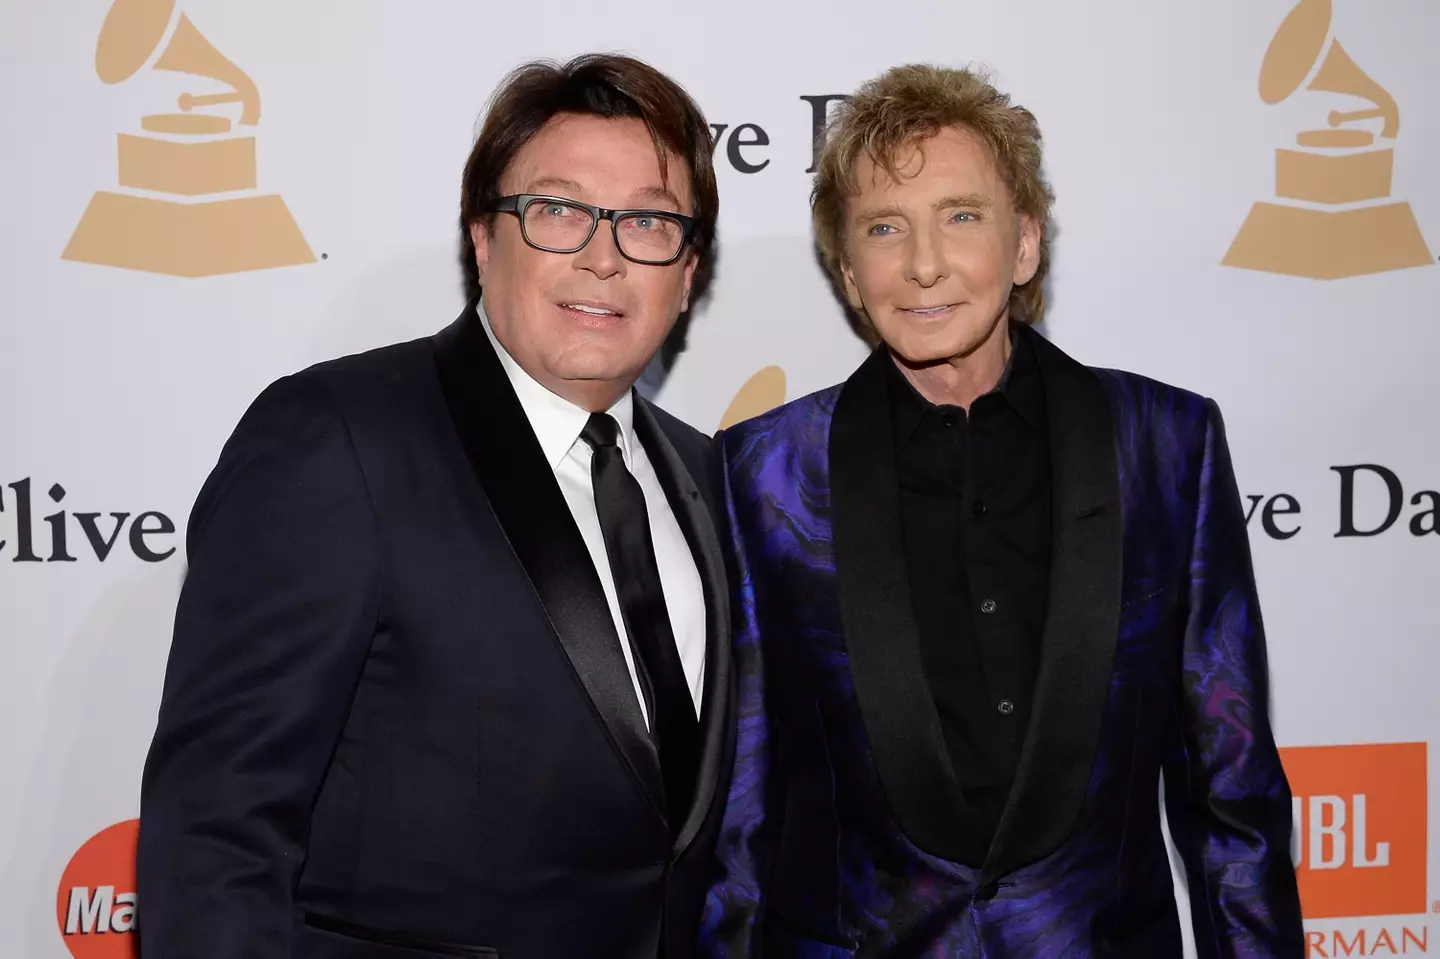 Manilow did add that he did not feel comfortable sharing his personal life back in the 70s.